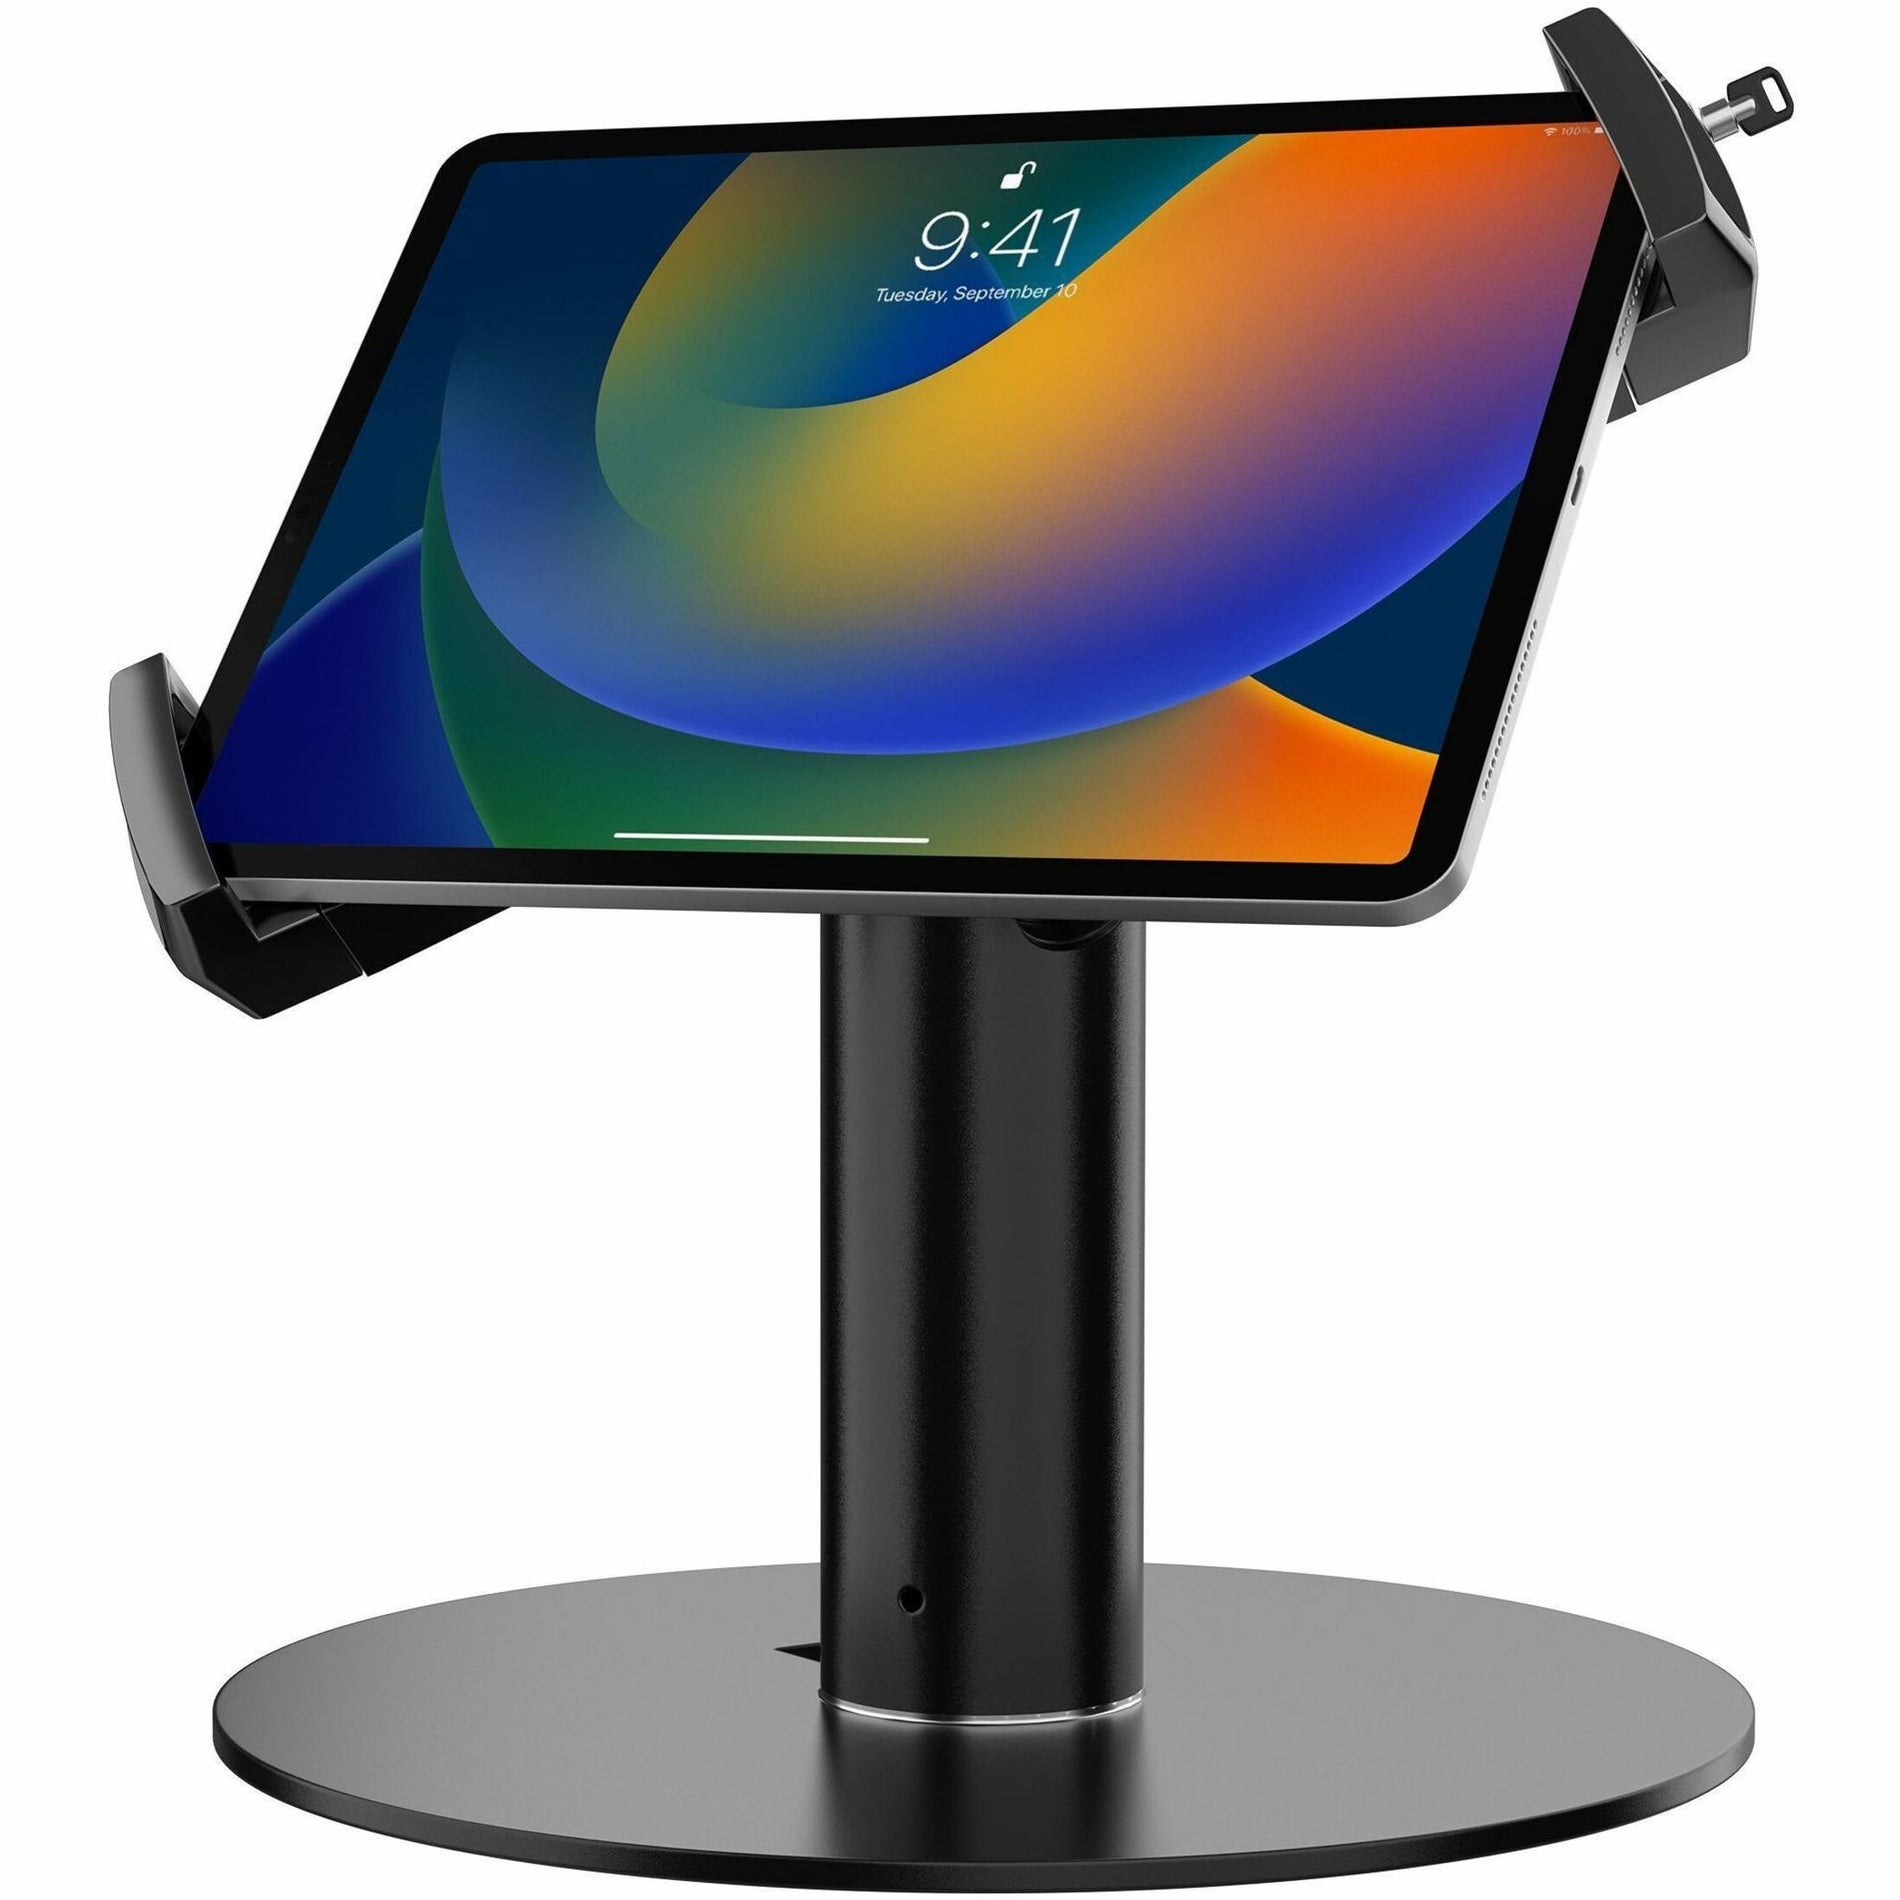 CTA Digital PAD-USGT Universal Security Grip Kiosk Stand for Tablets, 360° Rotating Base, Scratch Resistant, Lockable, Cable Management